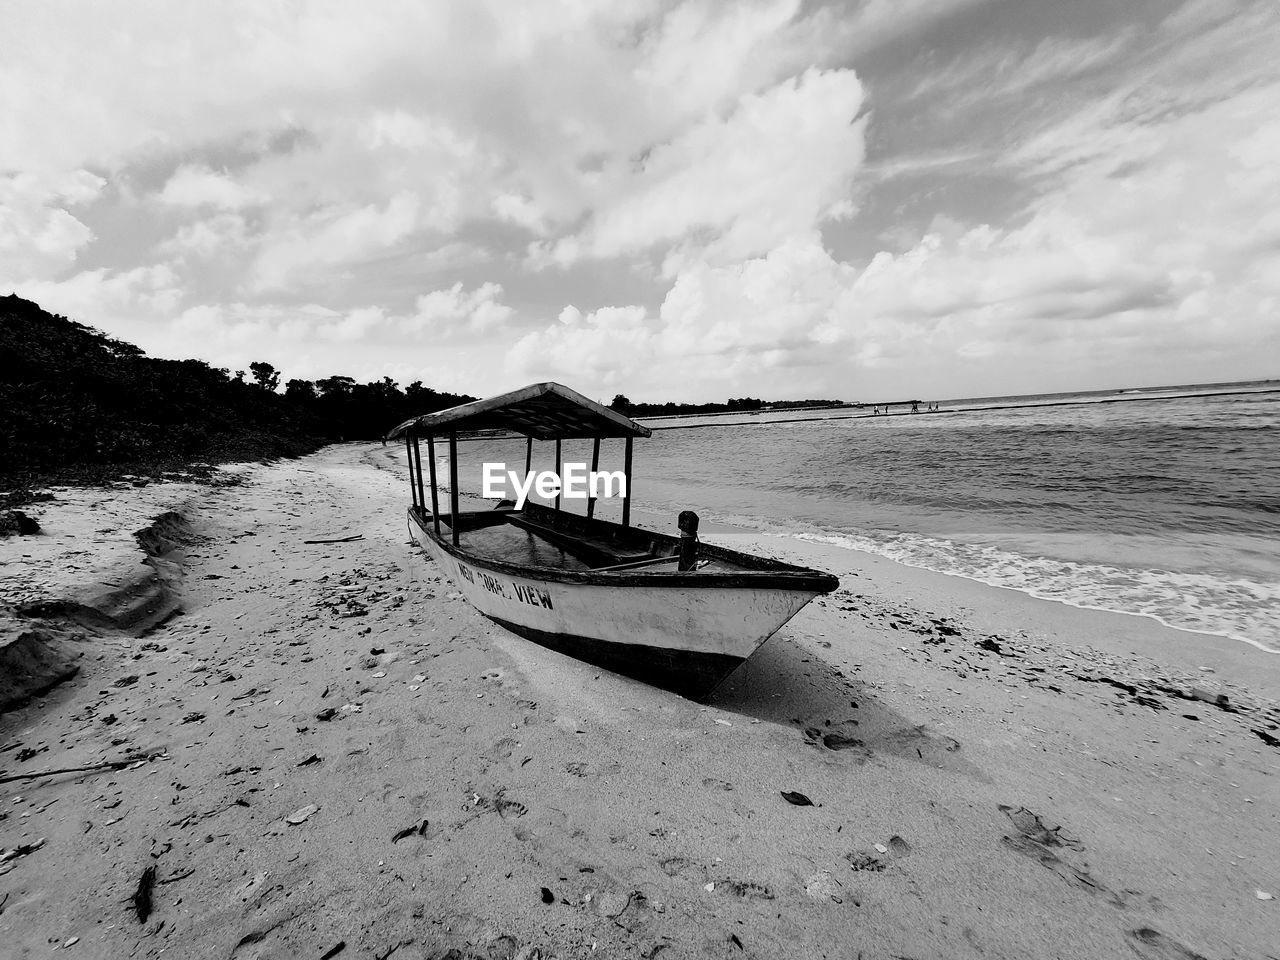 water, beach, land, sky, shore, sea, sand, black and white, cloud, nautical vessel, nature, coast, scenics - nature, monochrome photography, beauty in nature, monochrome, transportation, wave, tranquility, ocean, mode of transportation, tranquil scene, vehicle, travel, boat, day, holiday, outdoors, non-urban scene, moored, horizon, no people, travel destinations, vacation, trip, bay, coastline, horizon over water, body of water, idyllic, environment, tourism